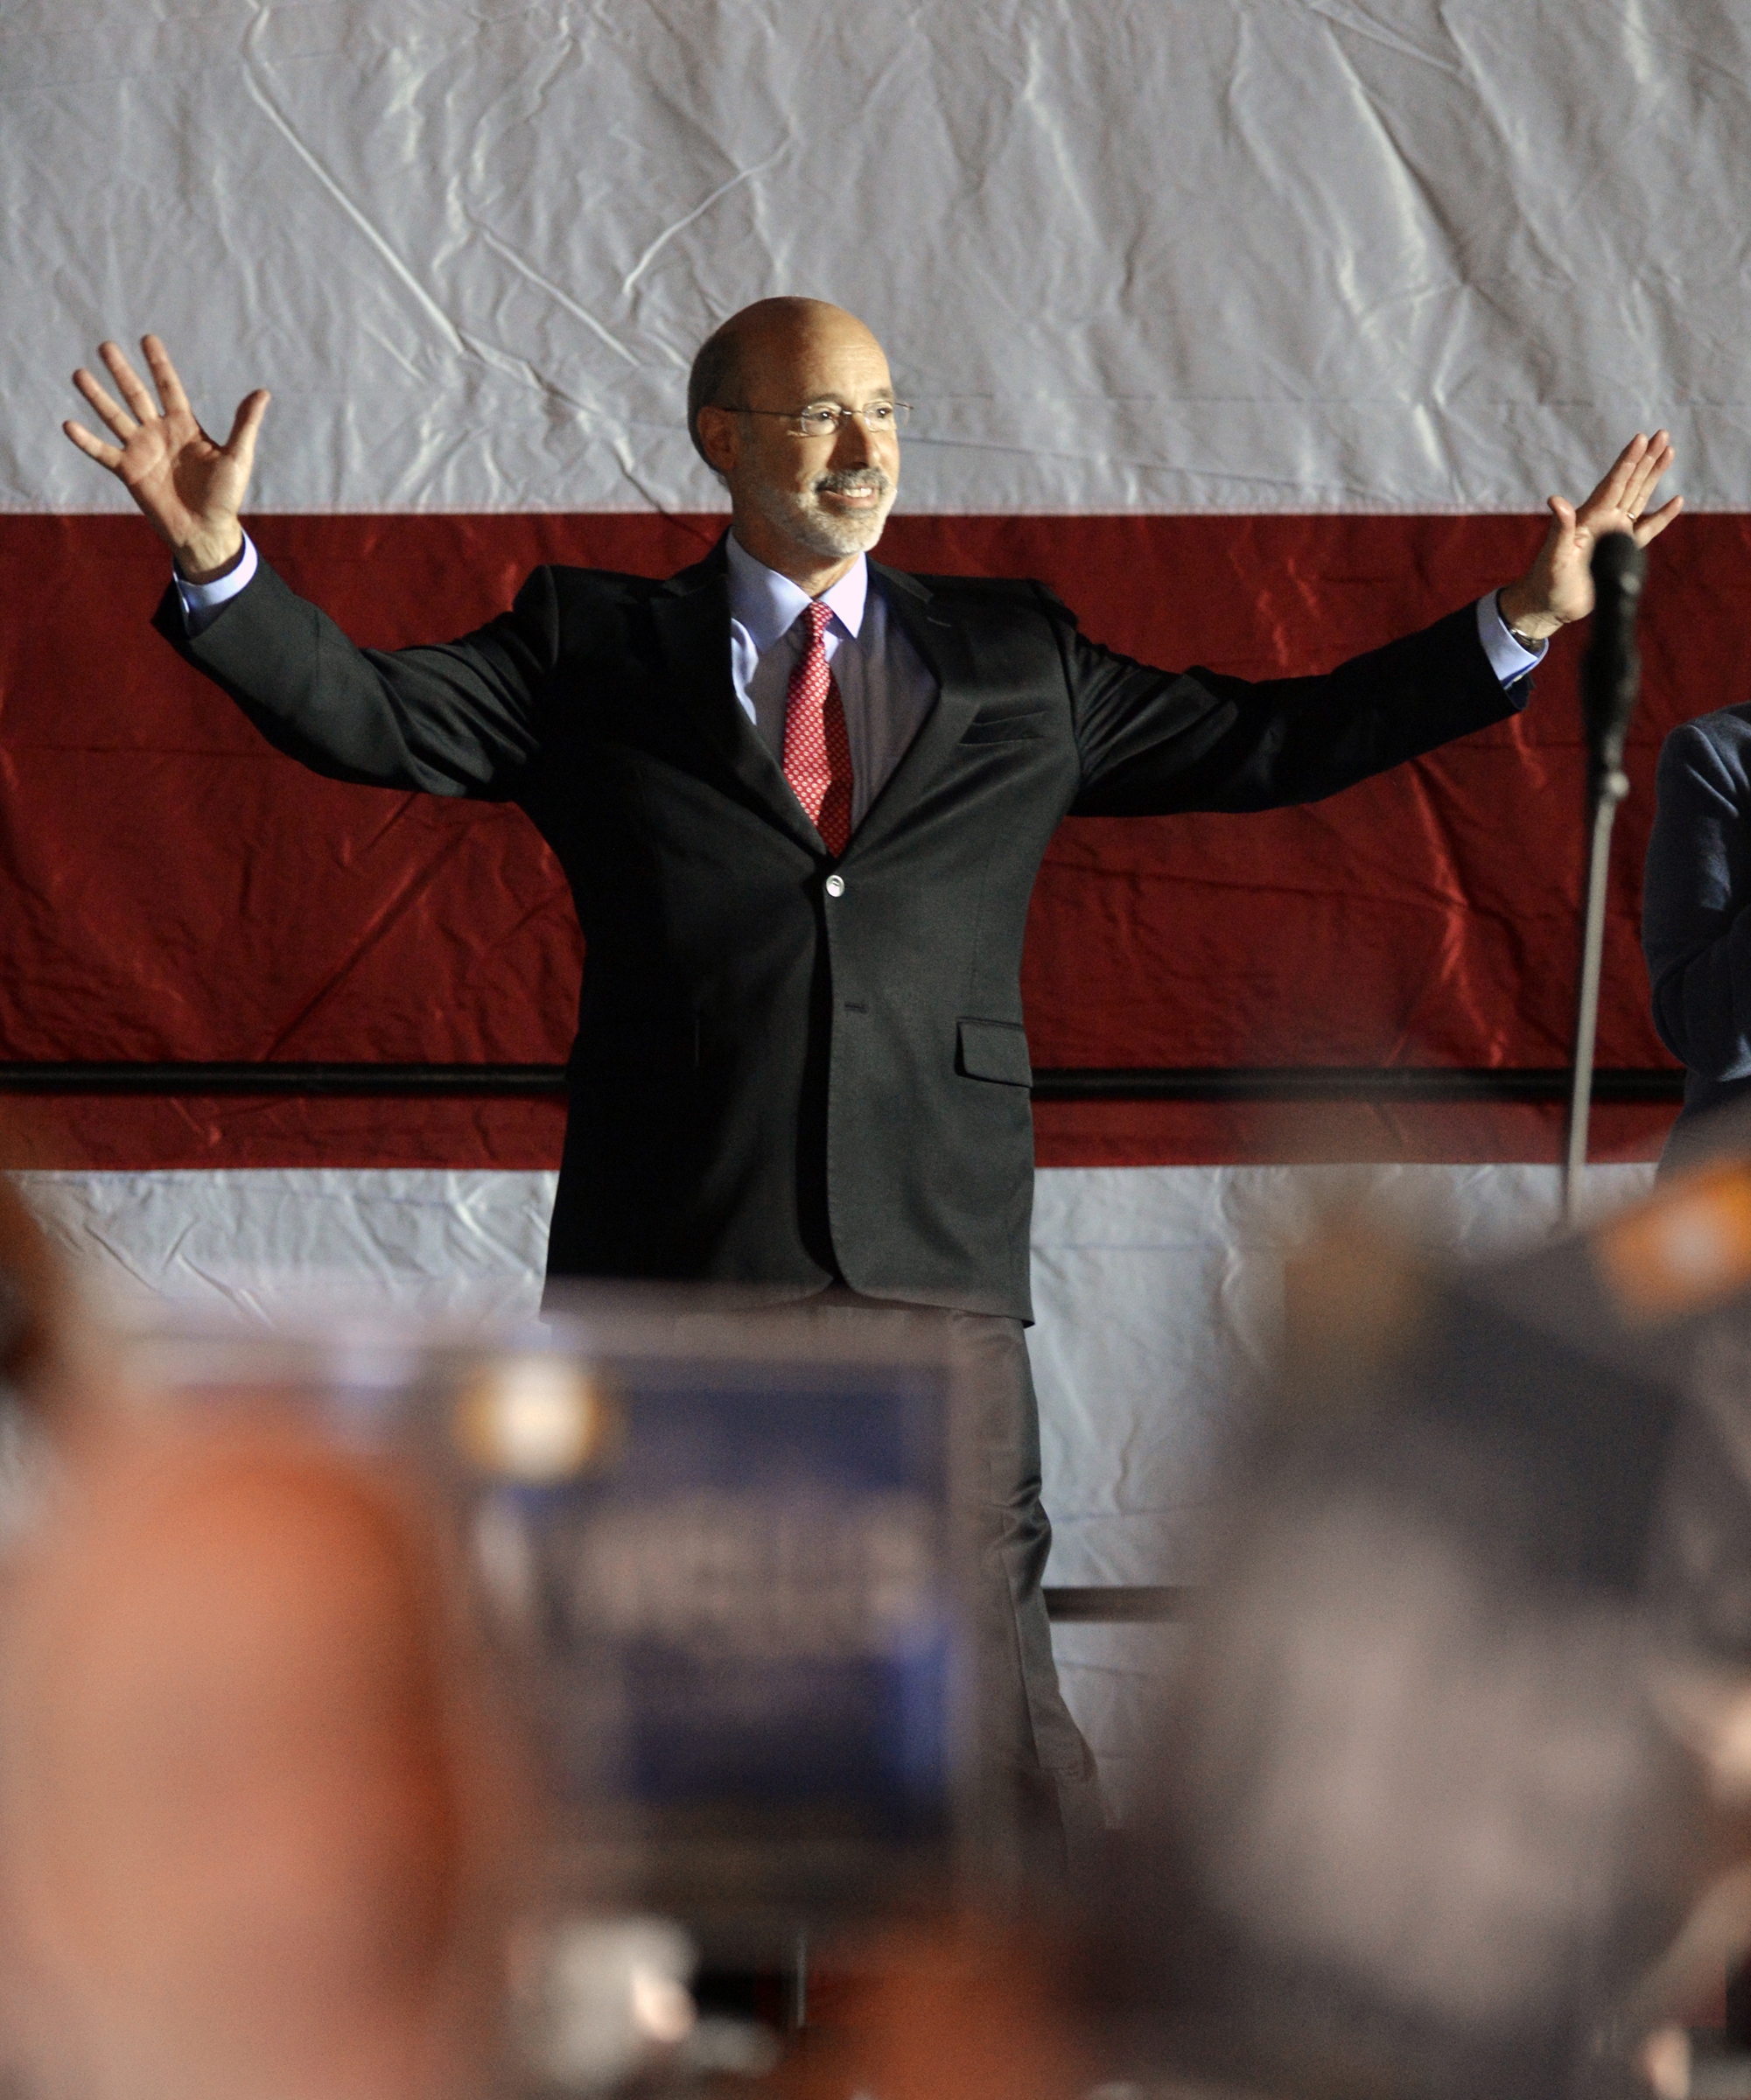 Pennsylvania Governor Tom Wolf will have a second term in Harrisburg.